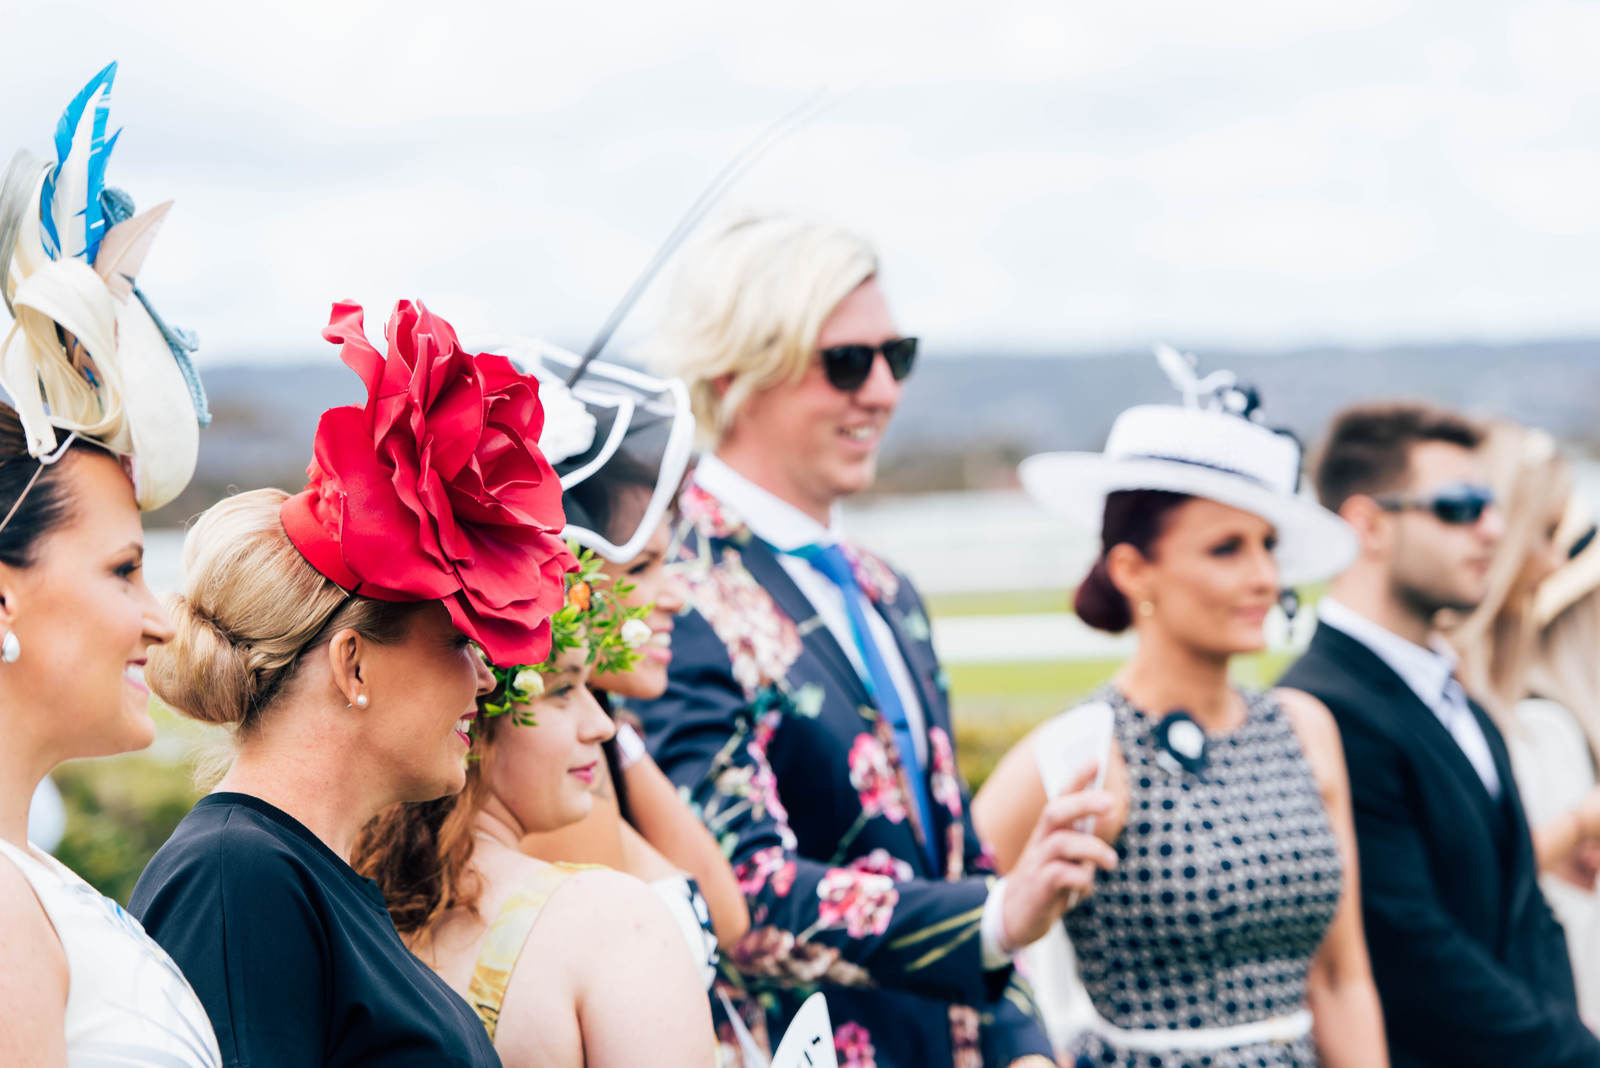 Deighton Cup brings out the best in everyone